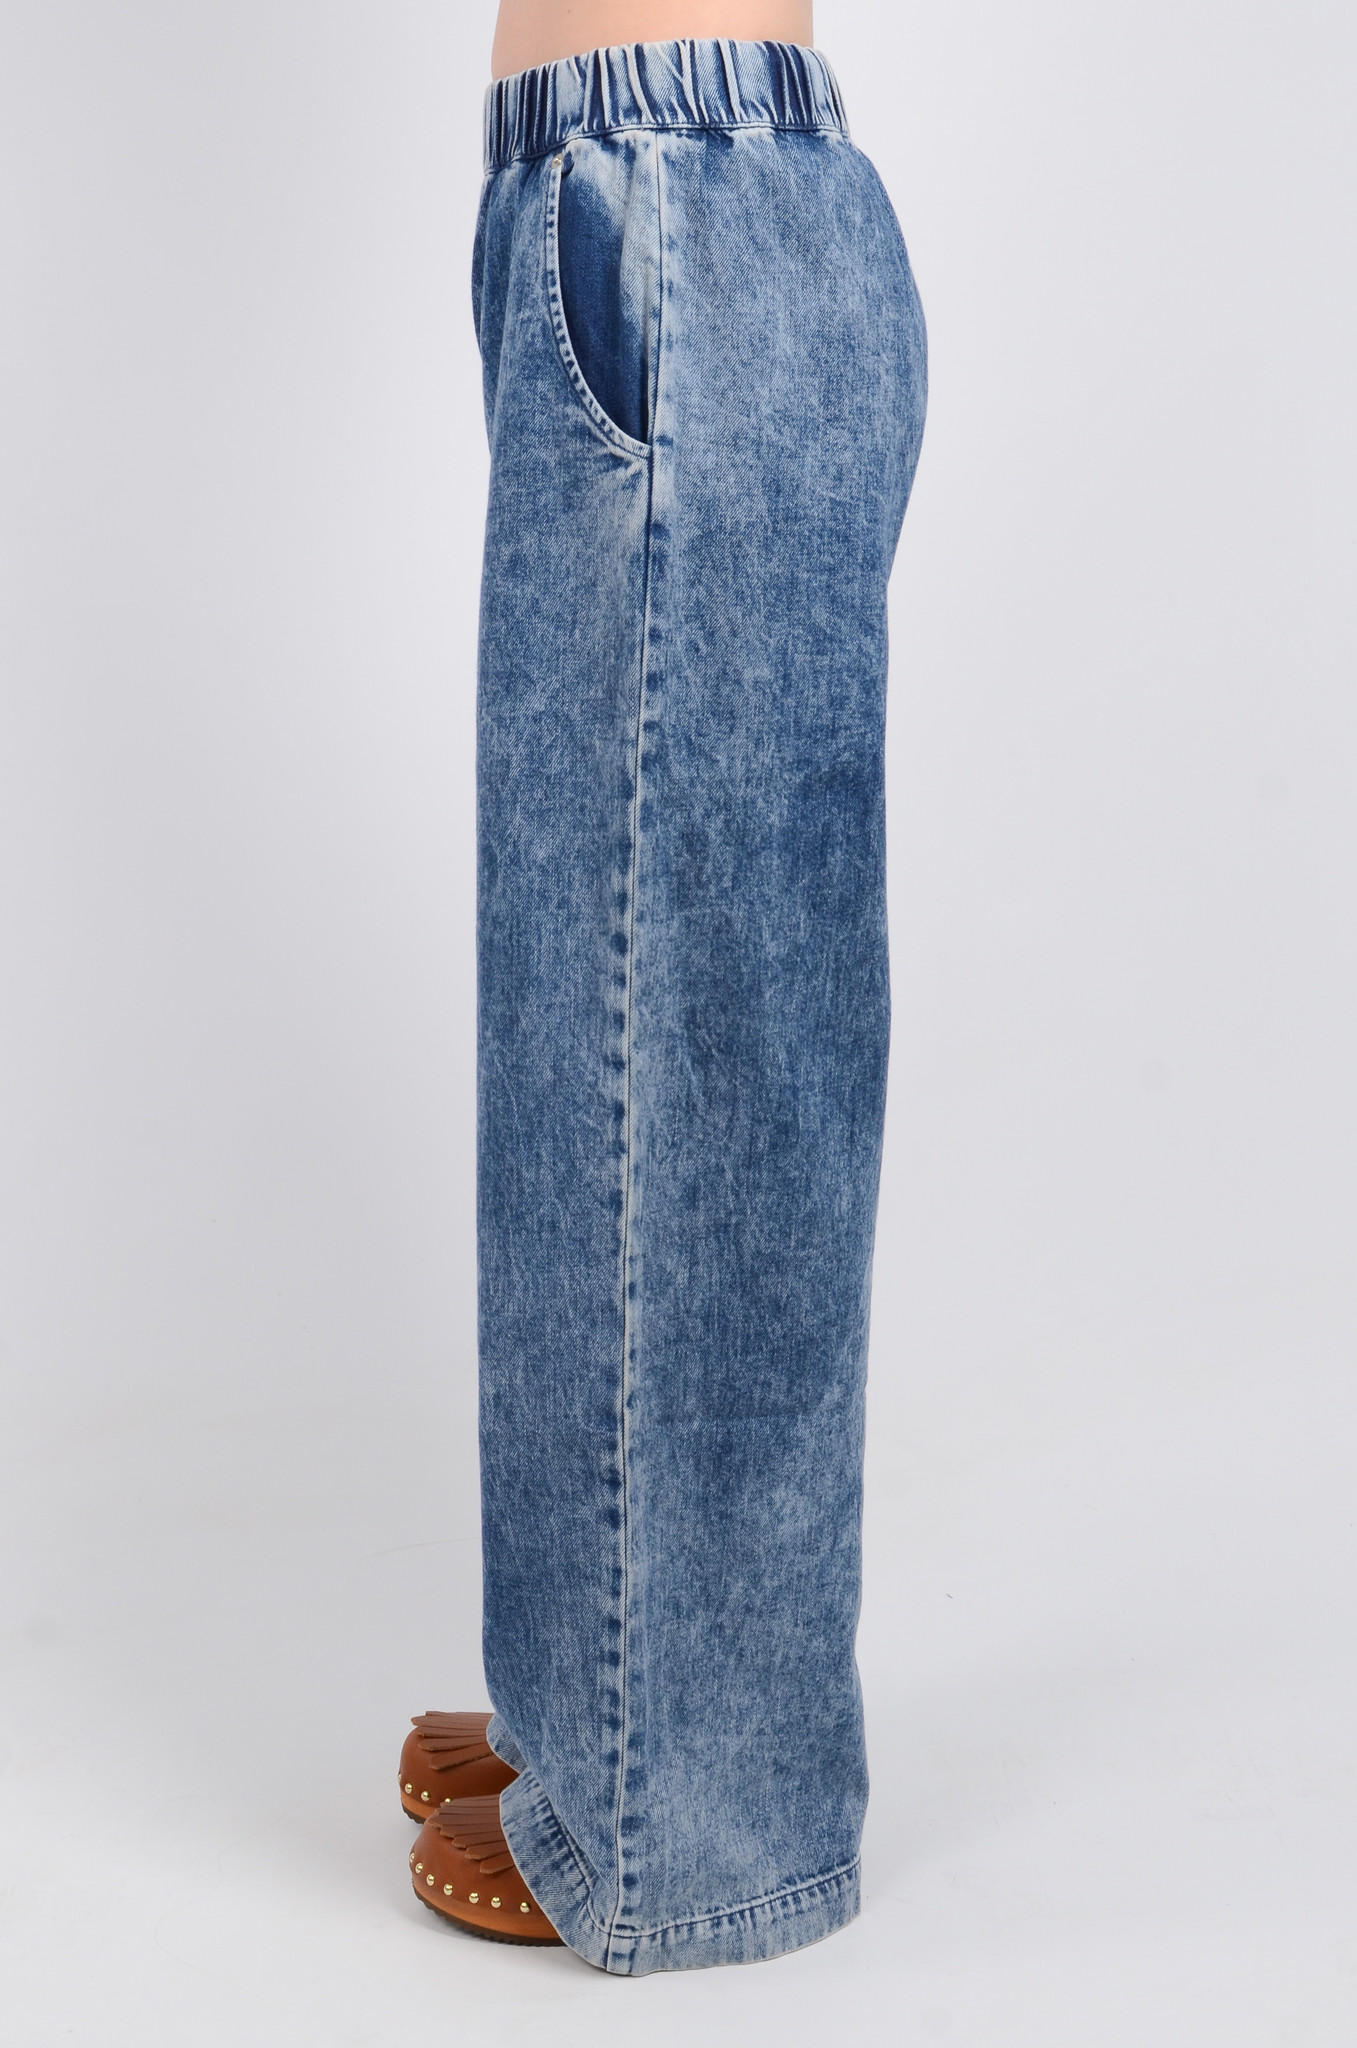 POLLY JEANS IN BLUE WASH-4